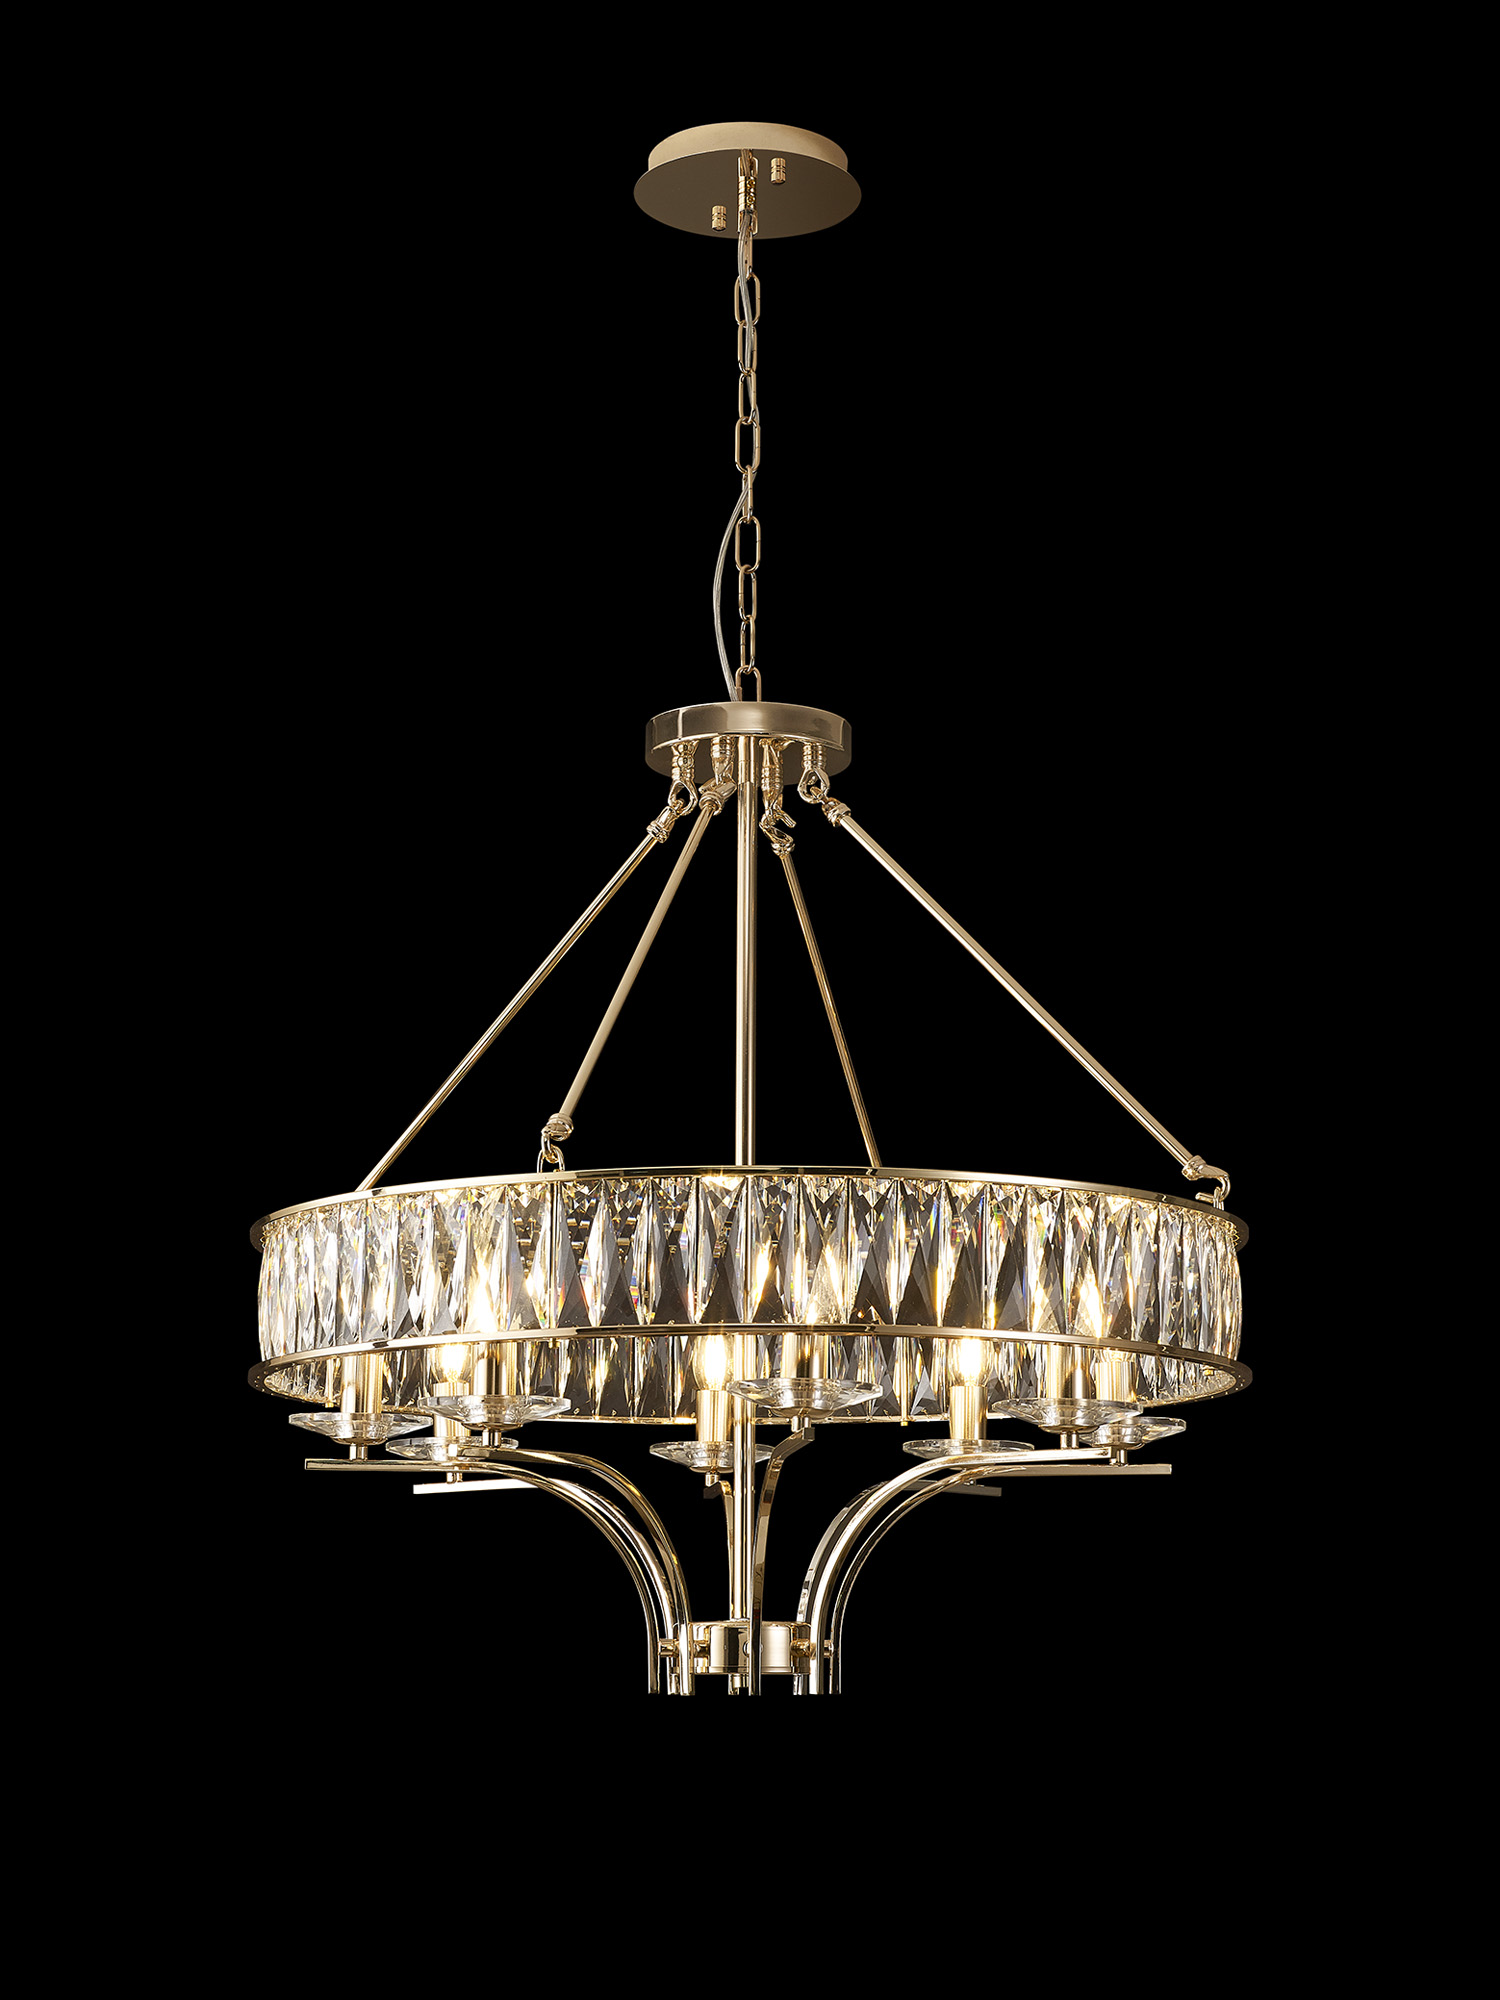 Vivienne French Gold Crystal Ceiling Lights Diyas Statement Crystal Fittings